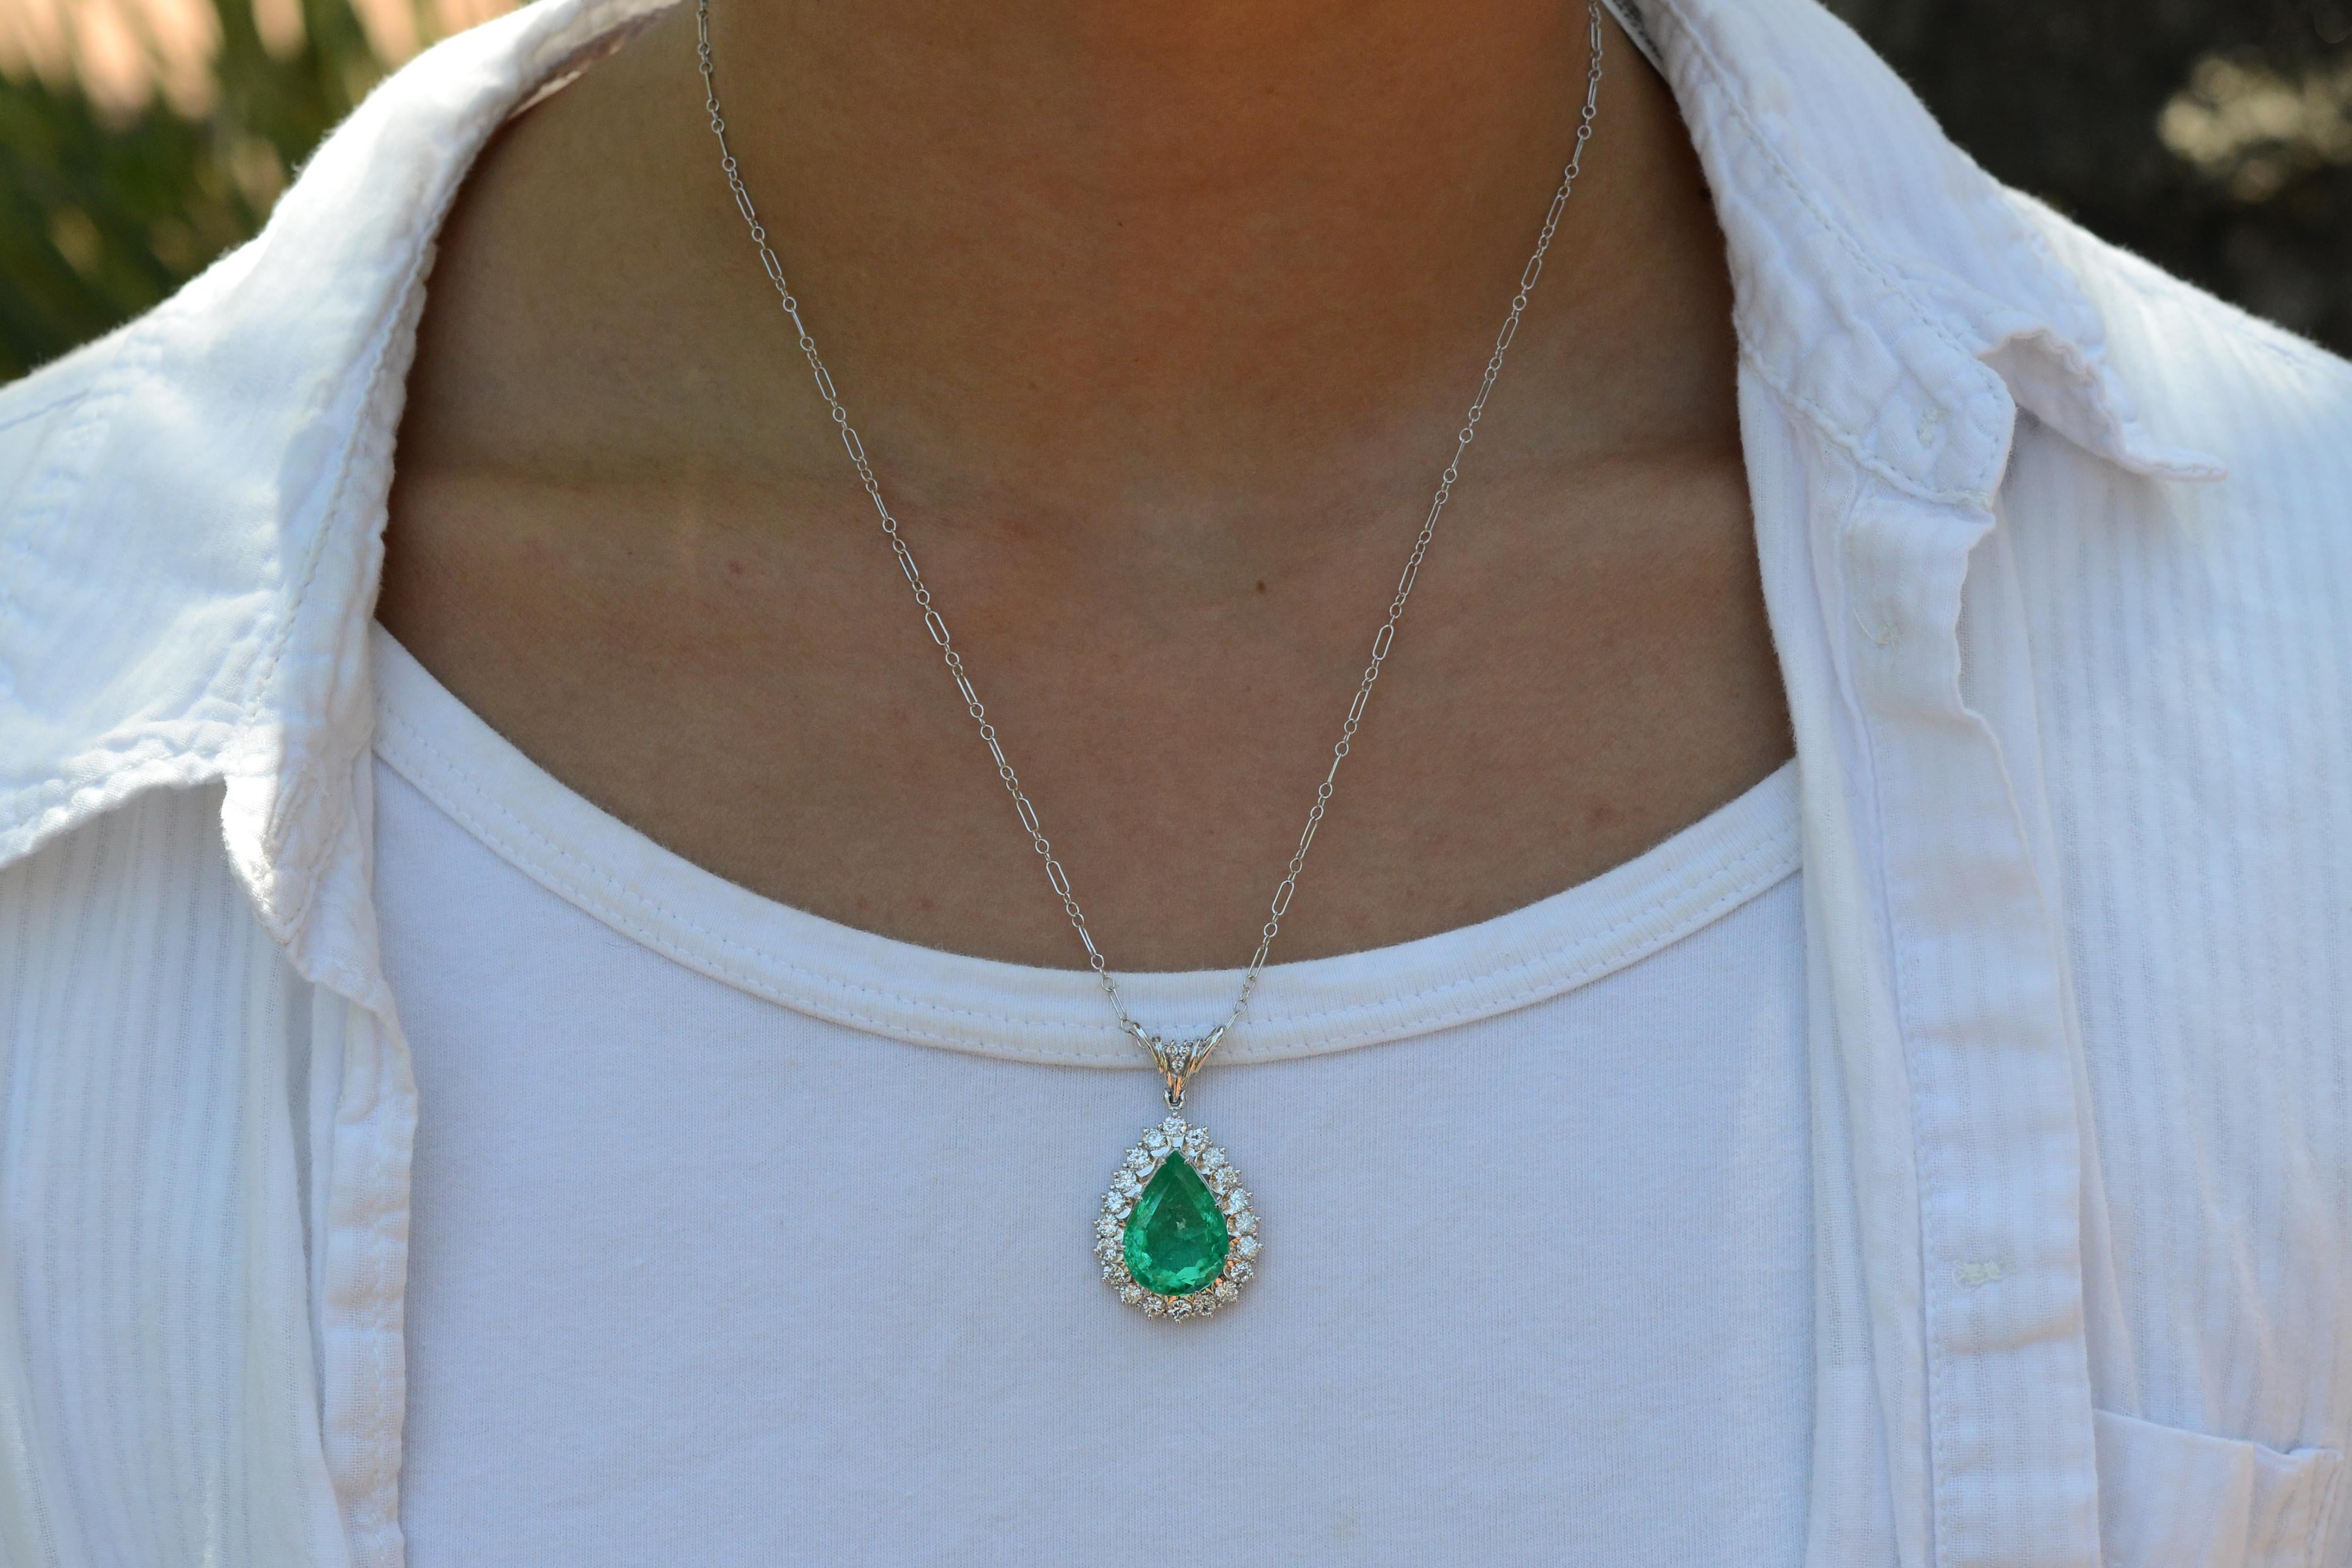 Adorn yourself in fantastic grandeur with this exquisite estate 10.38 carat emerald pendant. Crafted with a GIA certified Colombian emerald, the gemstone is perfectly cut and faceted into a perfect pear to maximize radiance. Accented by 23 dazzling